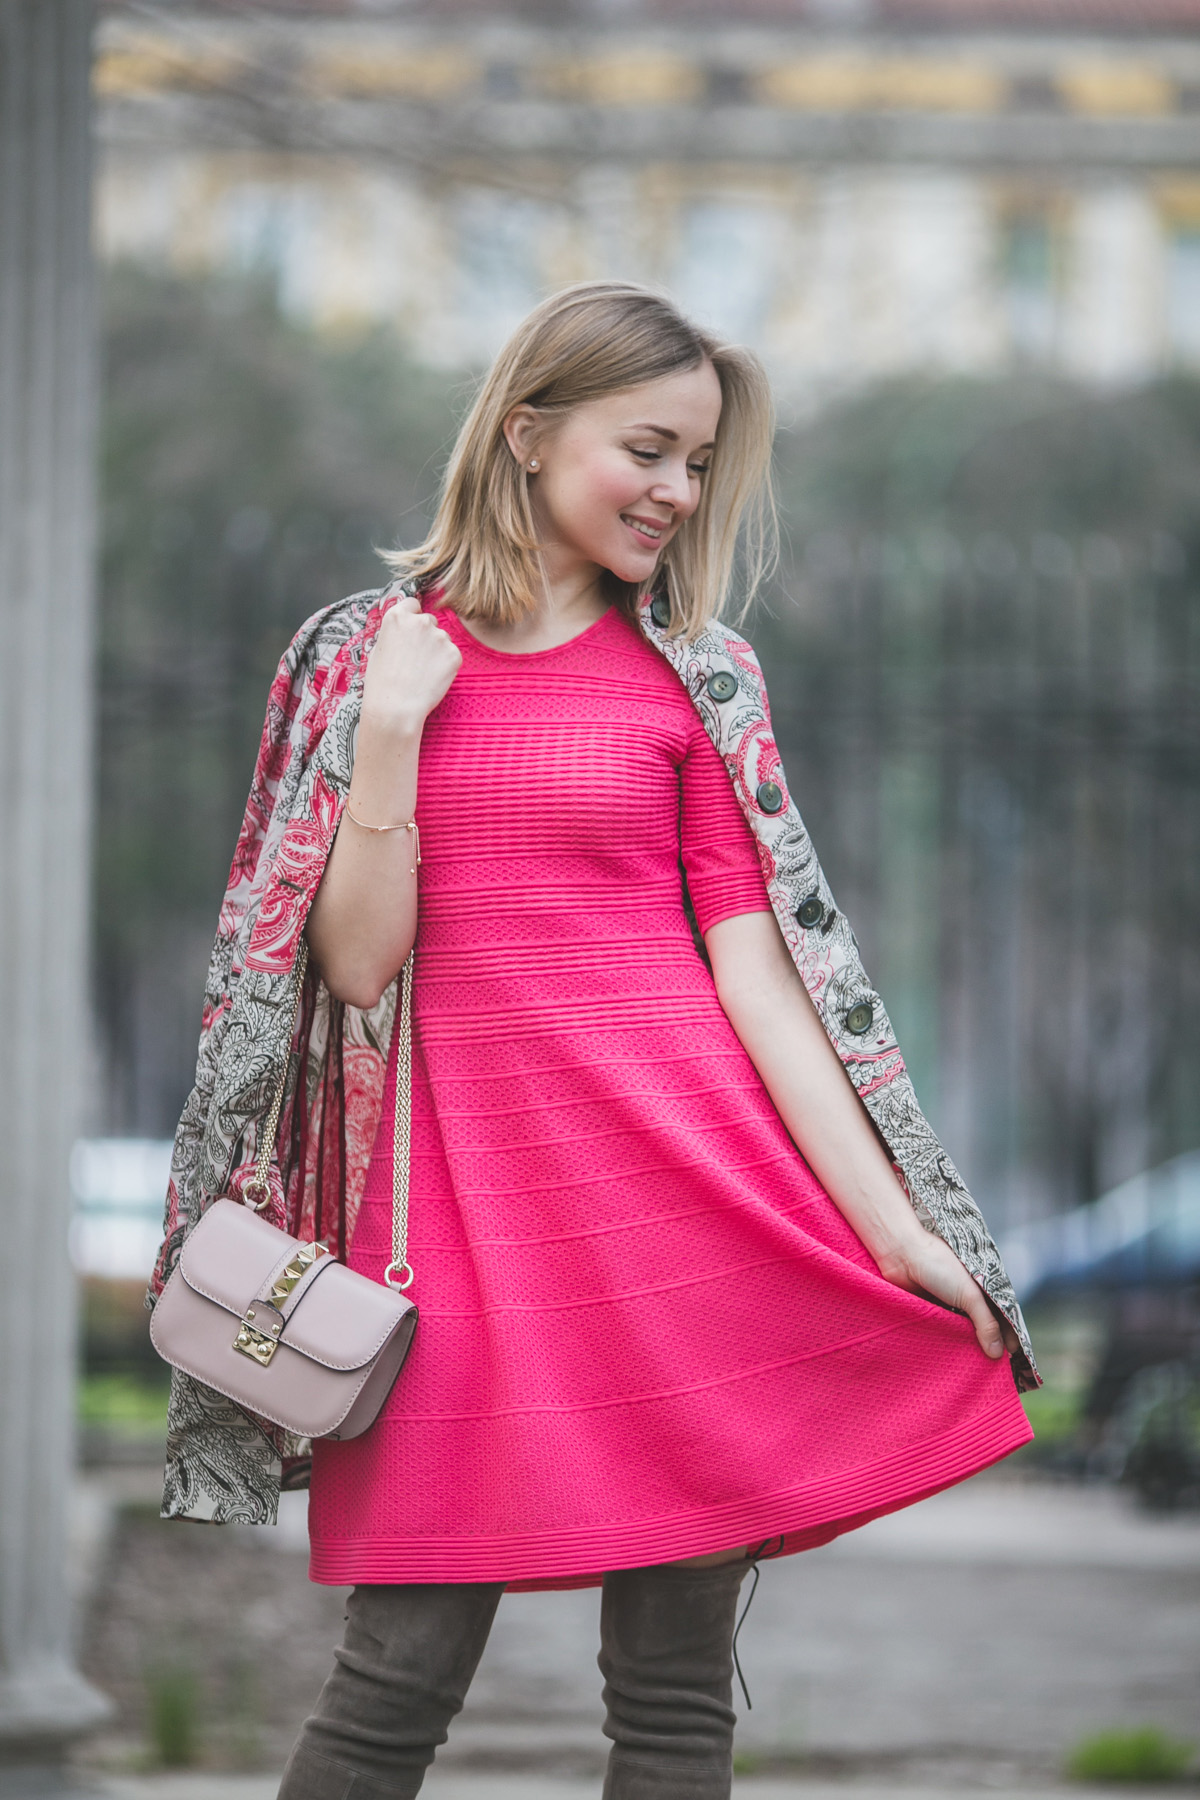 darya kamalova thecablook fashion lifestyle russian italian blogger wears mmissoni pink dress with stuart weitzman over knee boots etro coat and valentino glamrock cipria bag-1959